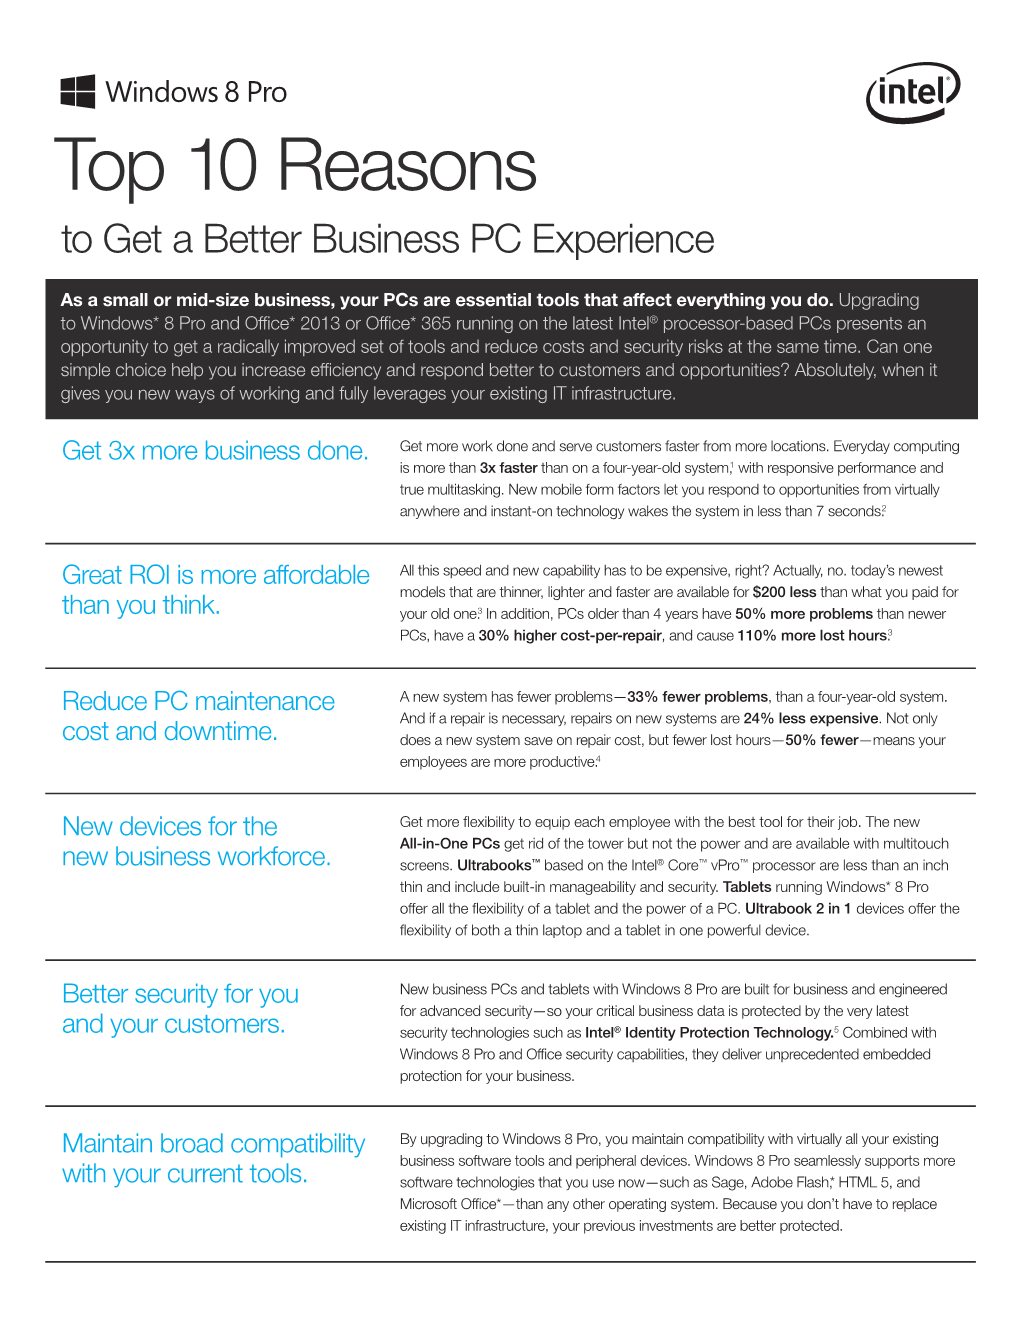 Top 10 Reasons to Get a Better Business PC Experience